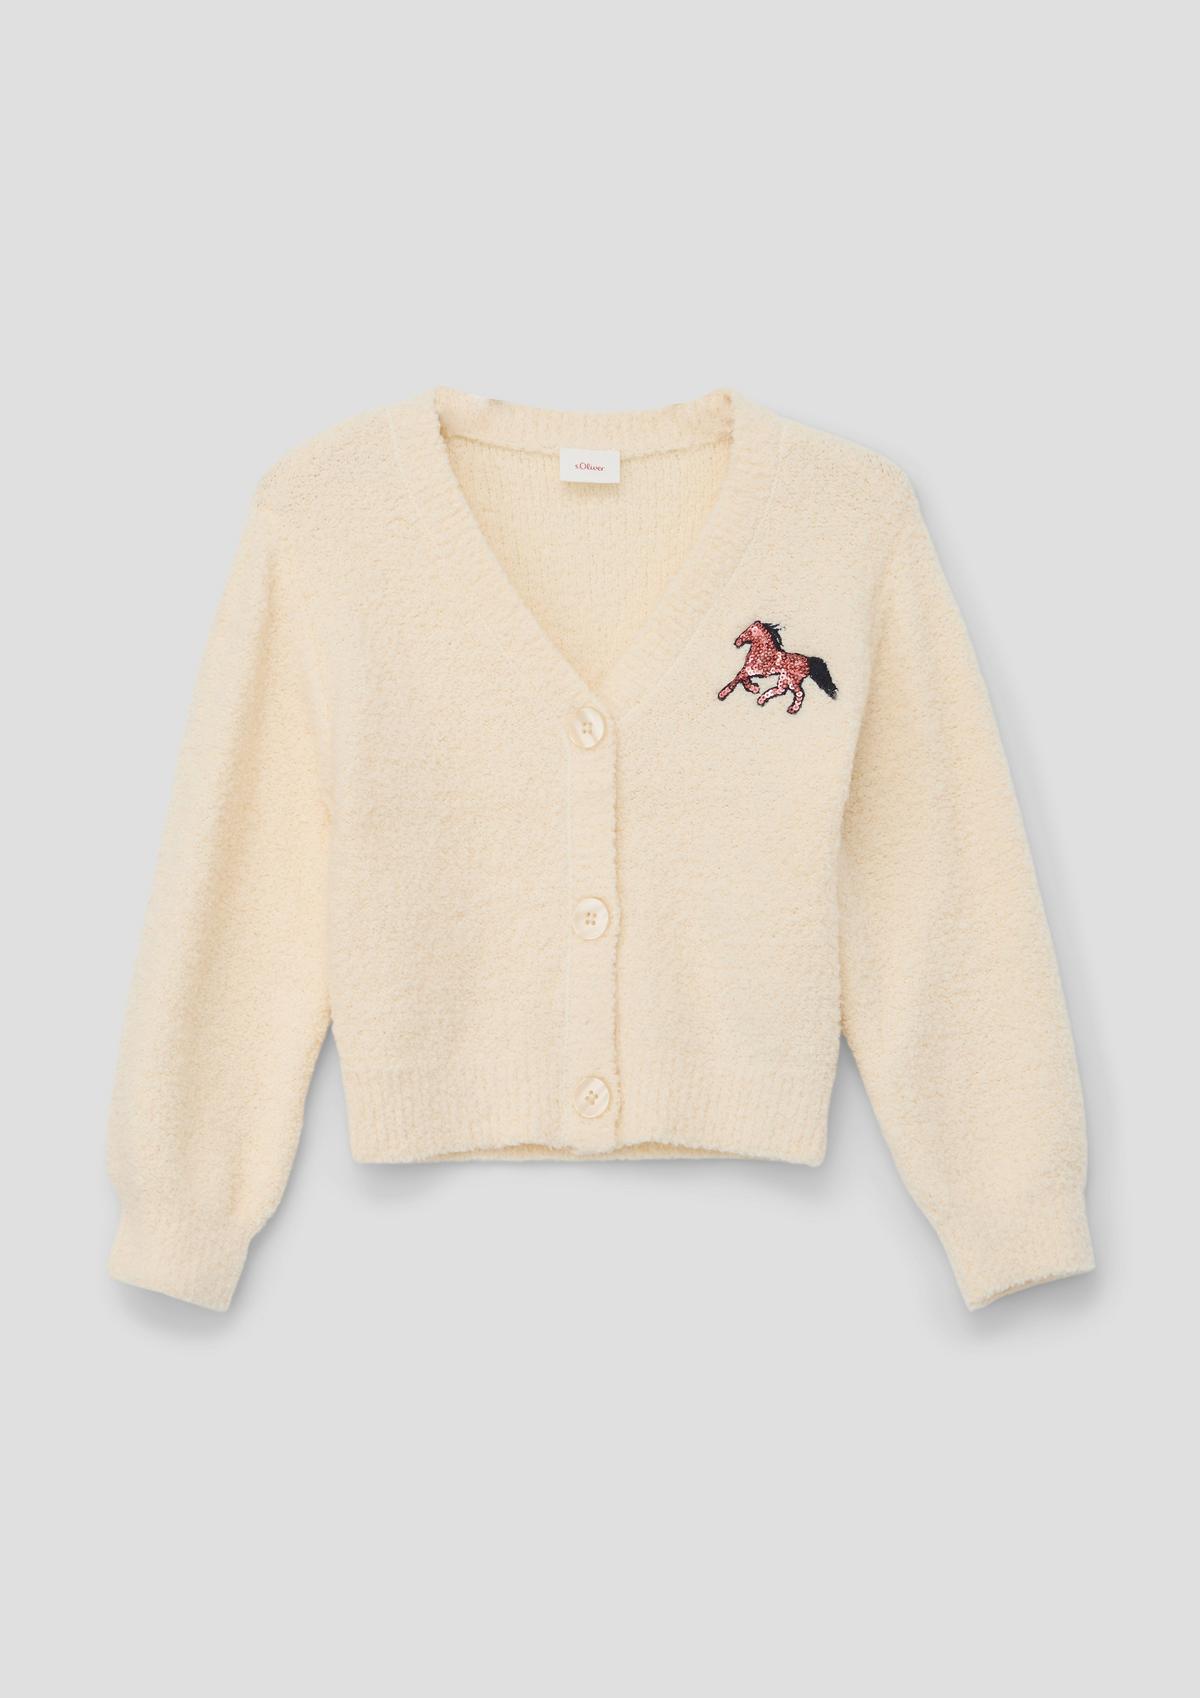 Sweatshirts and knitwear for girls and teens